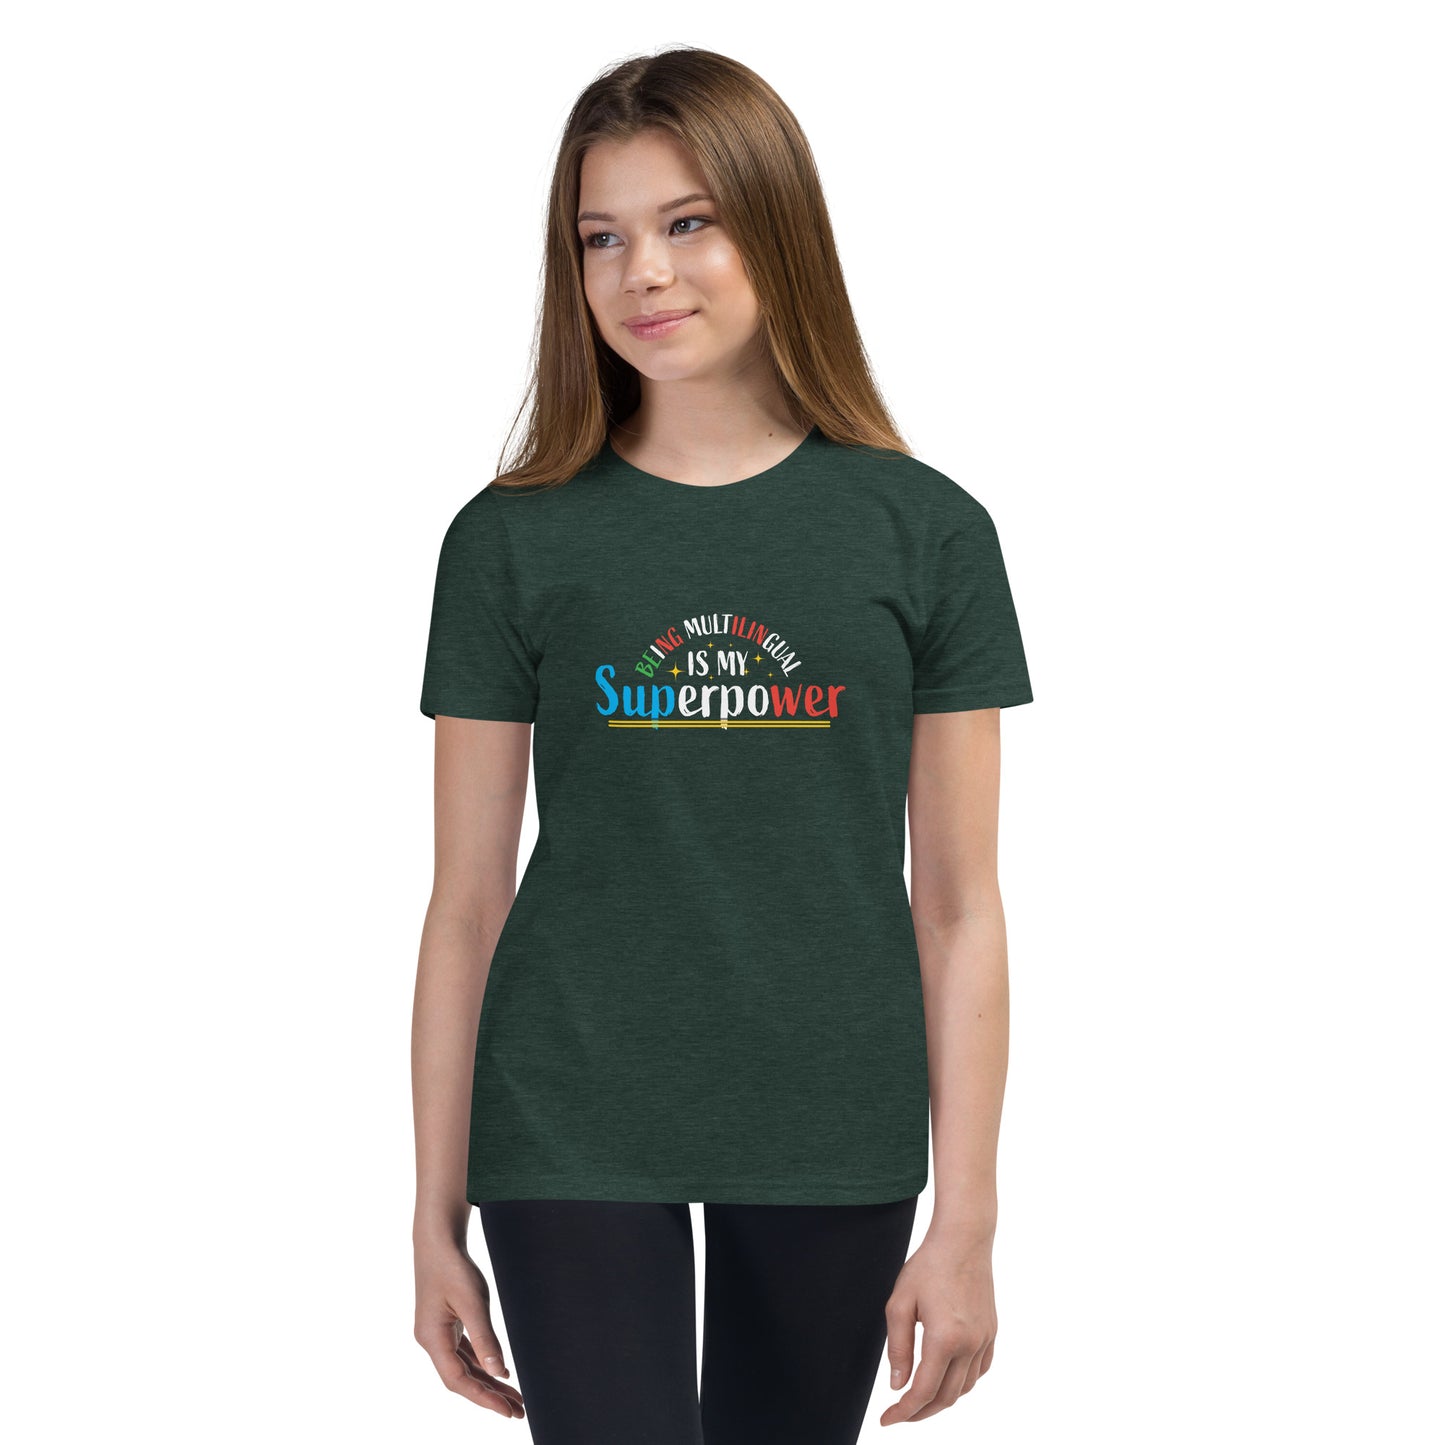 Multilingual Superpower Youth Short Sleeve T-Shirt.